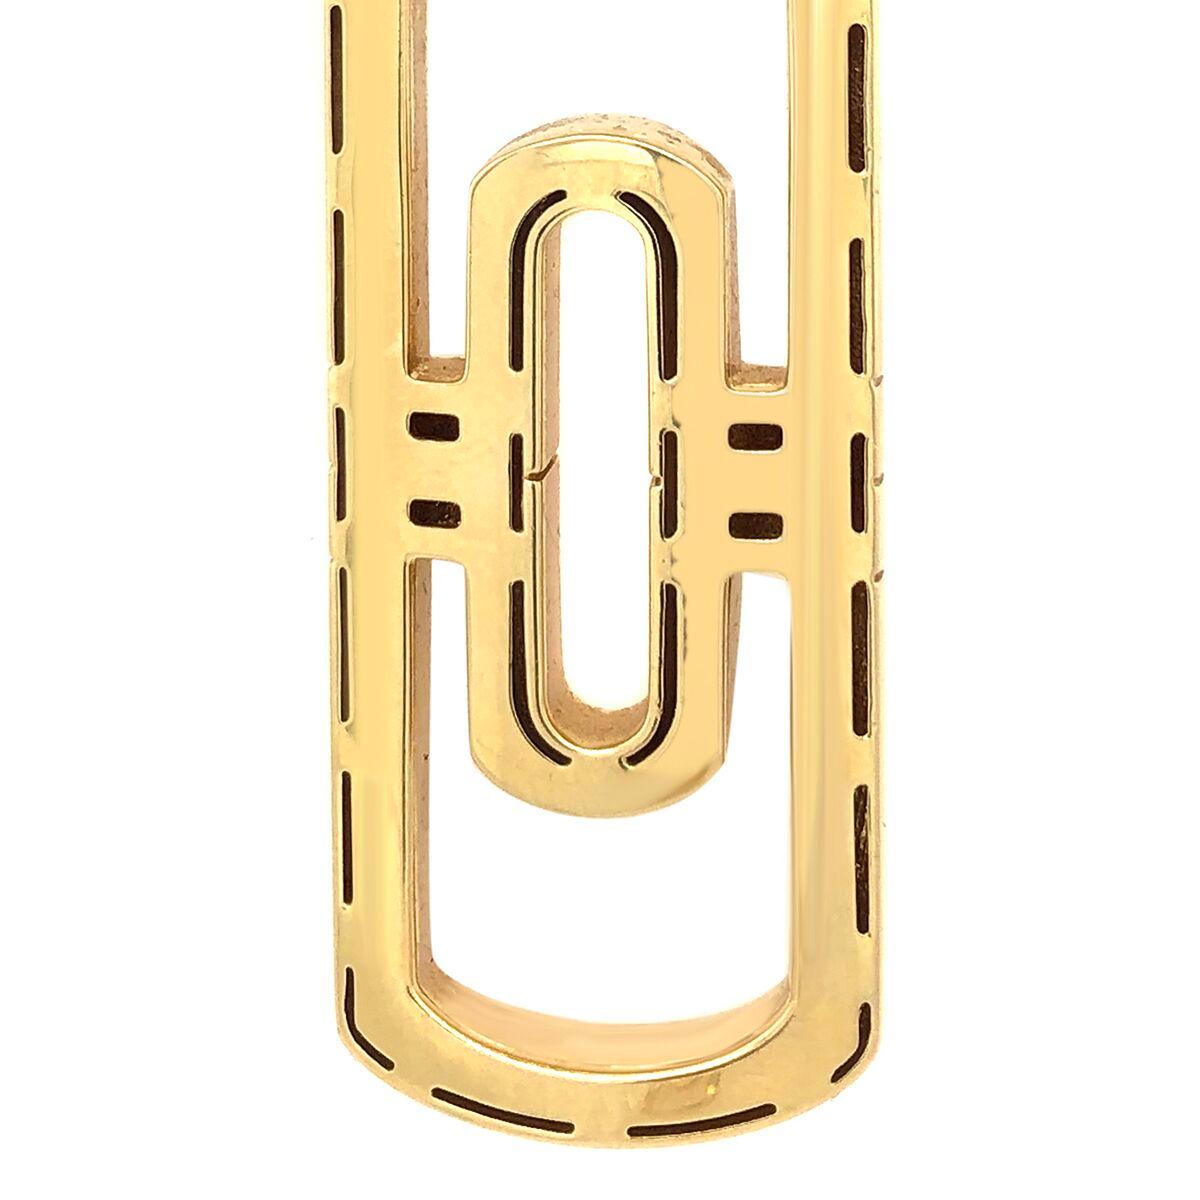 Designer: Bvlgari
Material: 18k Yellow Gold
Year of Manufacture: Circa 1980s
Condition: Excellent
Total Weight: 27.7 grams
Length: 14.3 inches
564